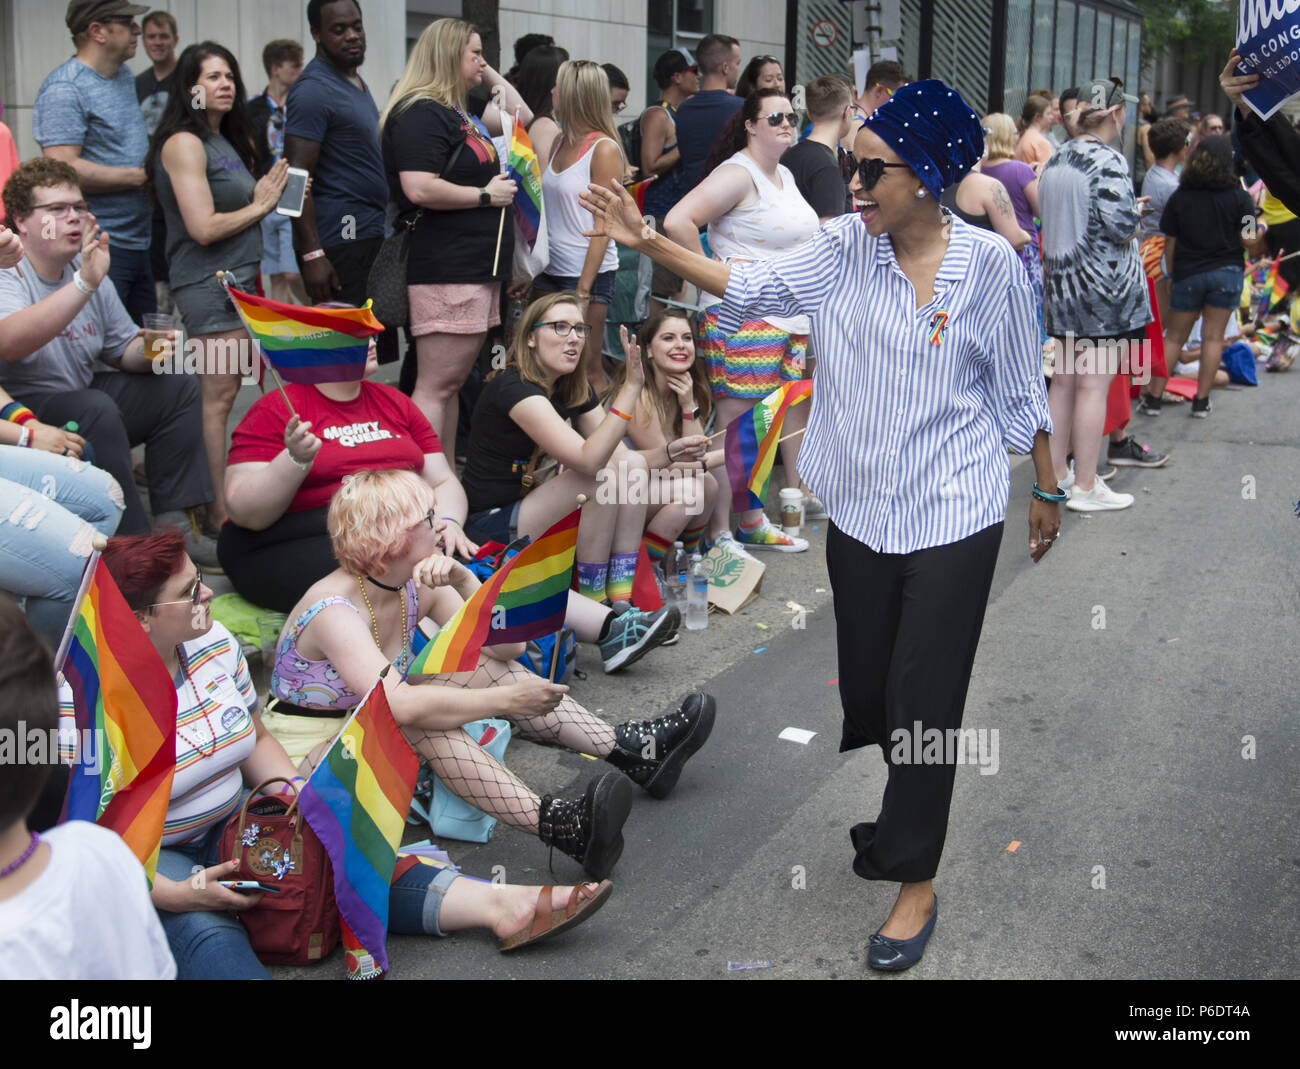 minneapolis-minnesota-usa-24th-june-2018-state-rep-ilhan-omar-the-dfl-endorsed-candidate-for-the-us-5th-congressional-district-campaigns-at-the-pride-parade-in-minneapolis-mn-credit-craig-lassigzuma-wirealamy-live-news-P6DT4A.jpg